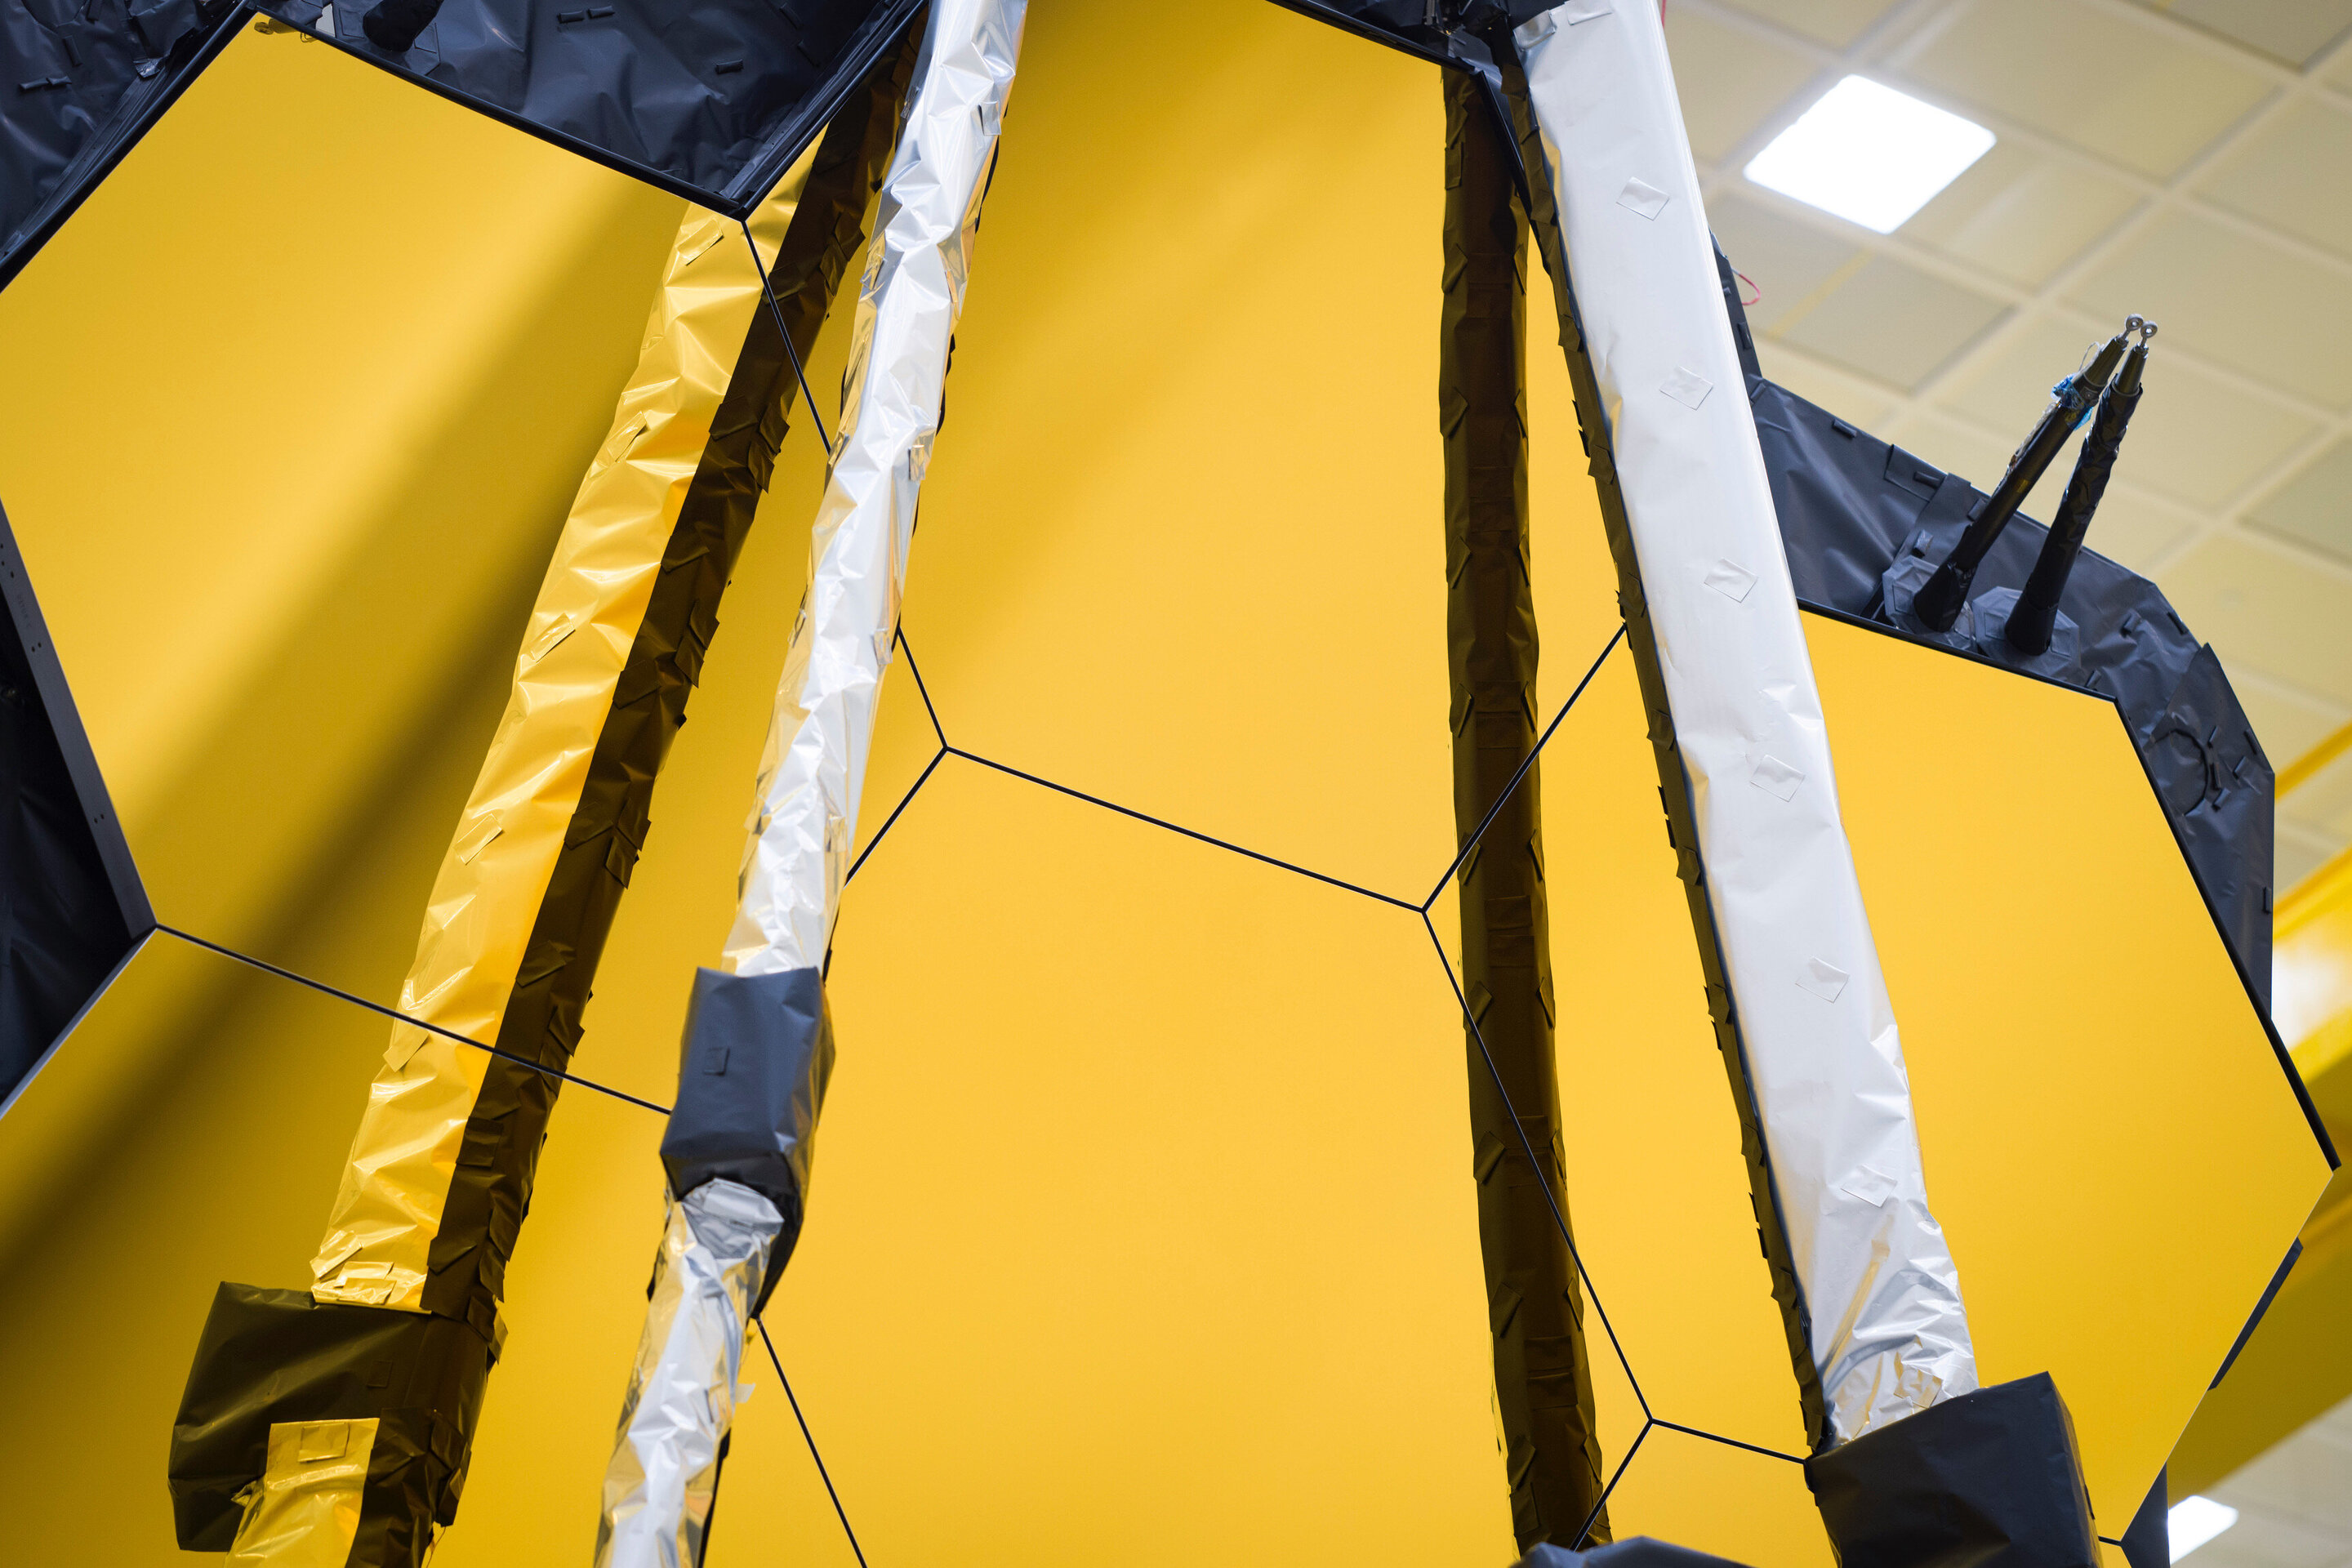 NASA’s James Webb Space Telescope completes final functional tests to prepare for launch